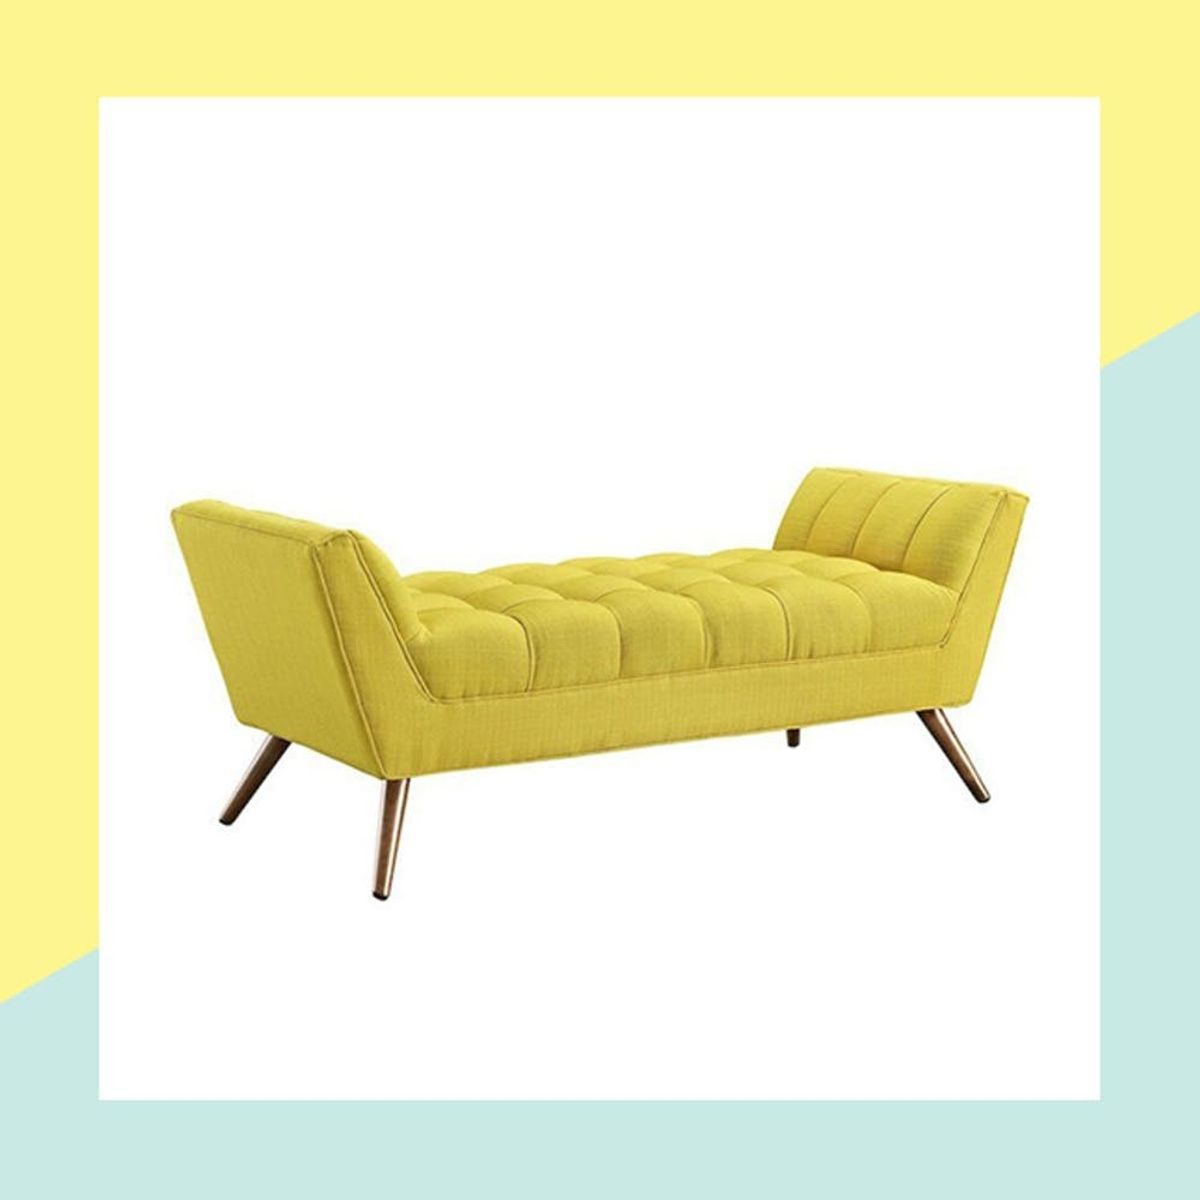 15 Mid-Century Modern Amazon Furniture Finds to Shop Now